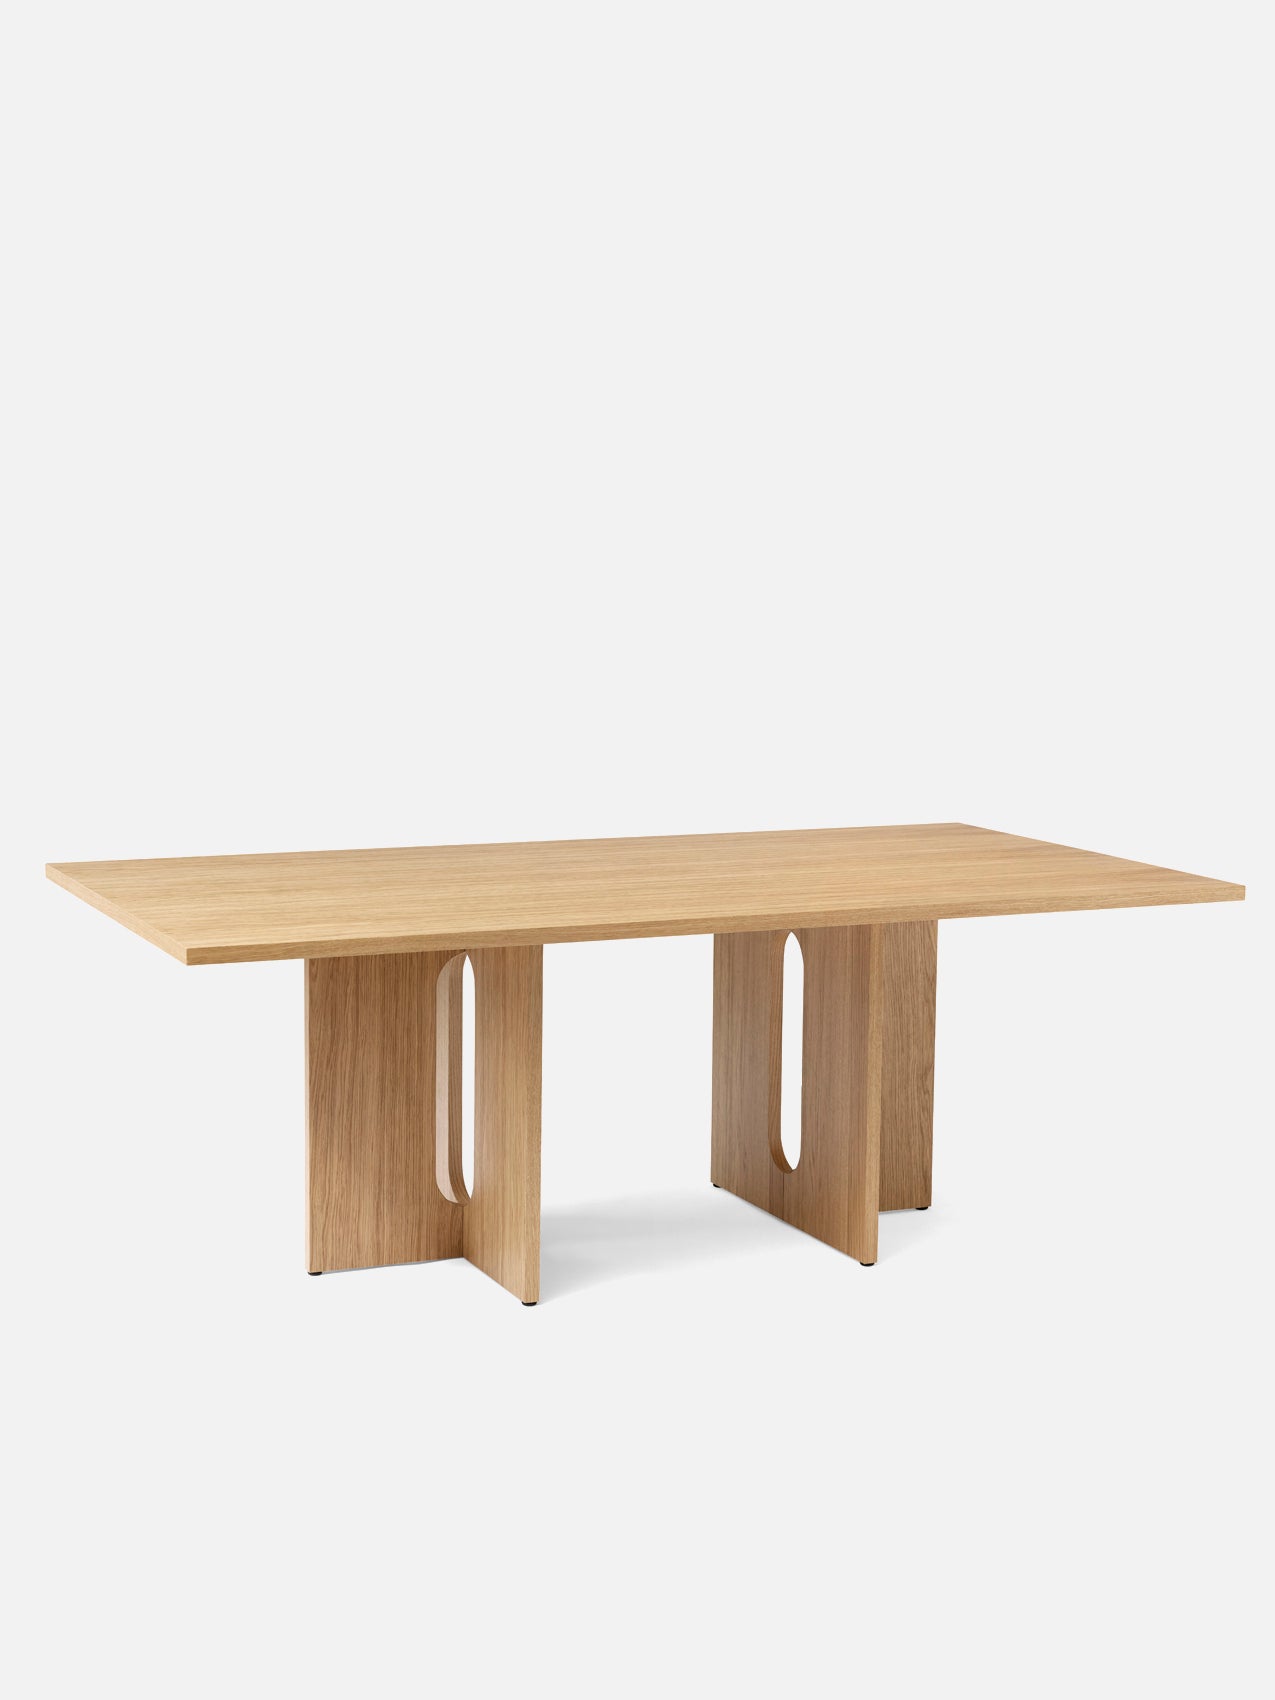 Androgyne Dining Table, Rectangular-Dining Table-Danielle Siggerud-Dining Height (83.7in)/Natural Oak-Rectangular - Natural Oak-menu-minimalist-modern-danish-design-home-decor